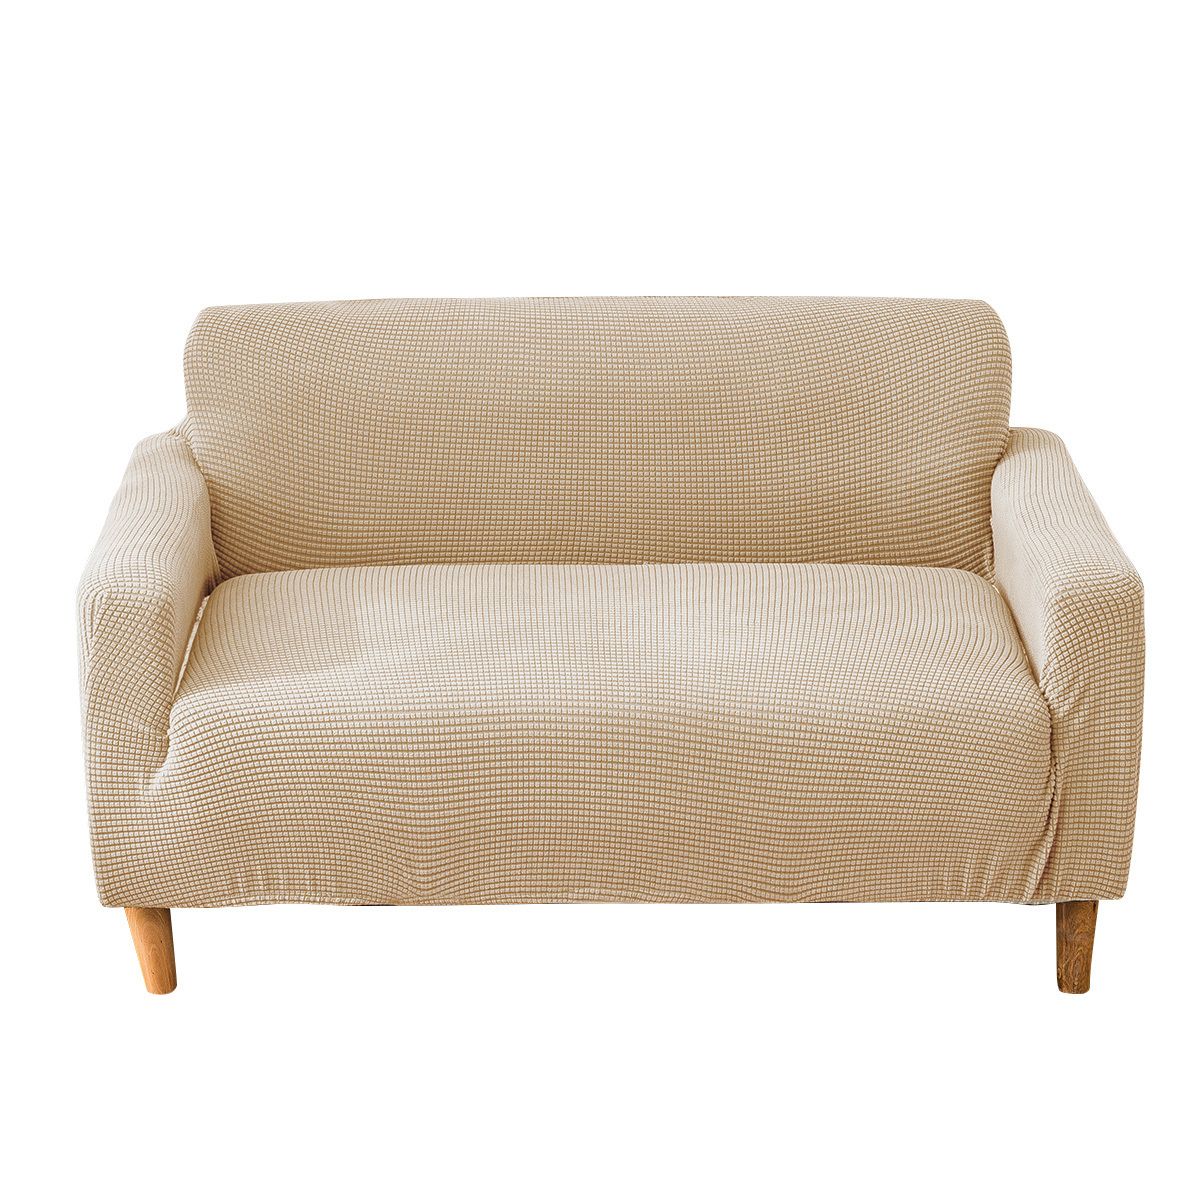 Beige-Four Seat Cover